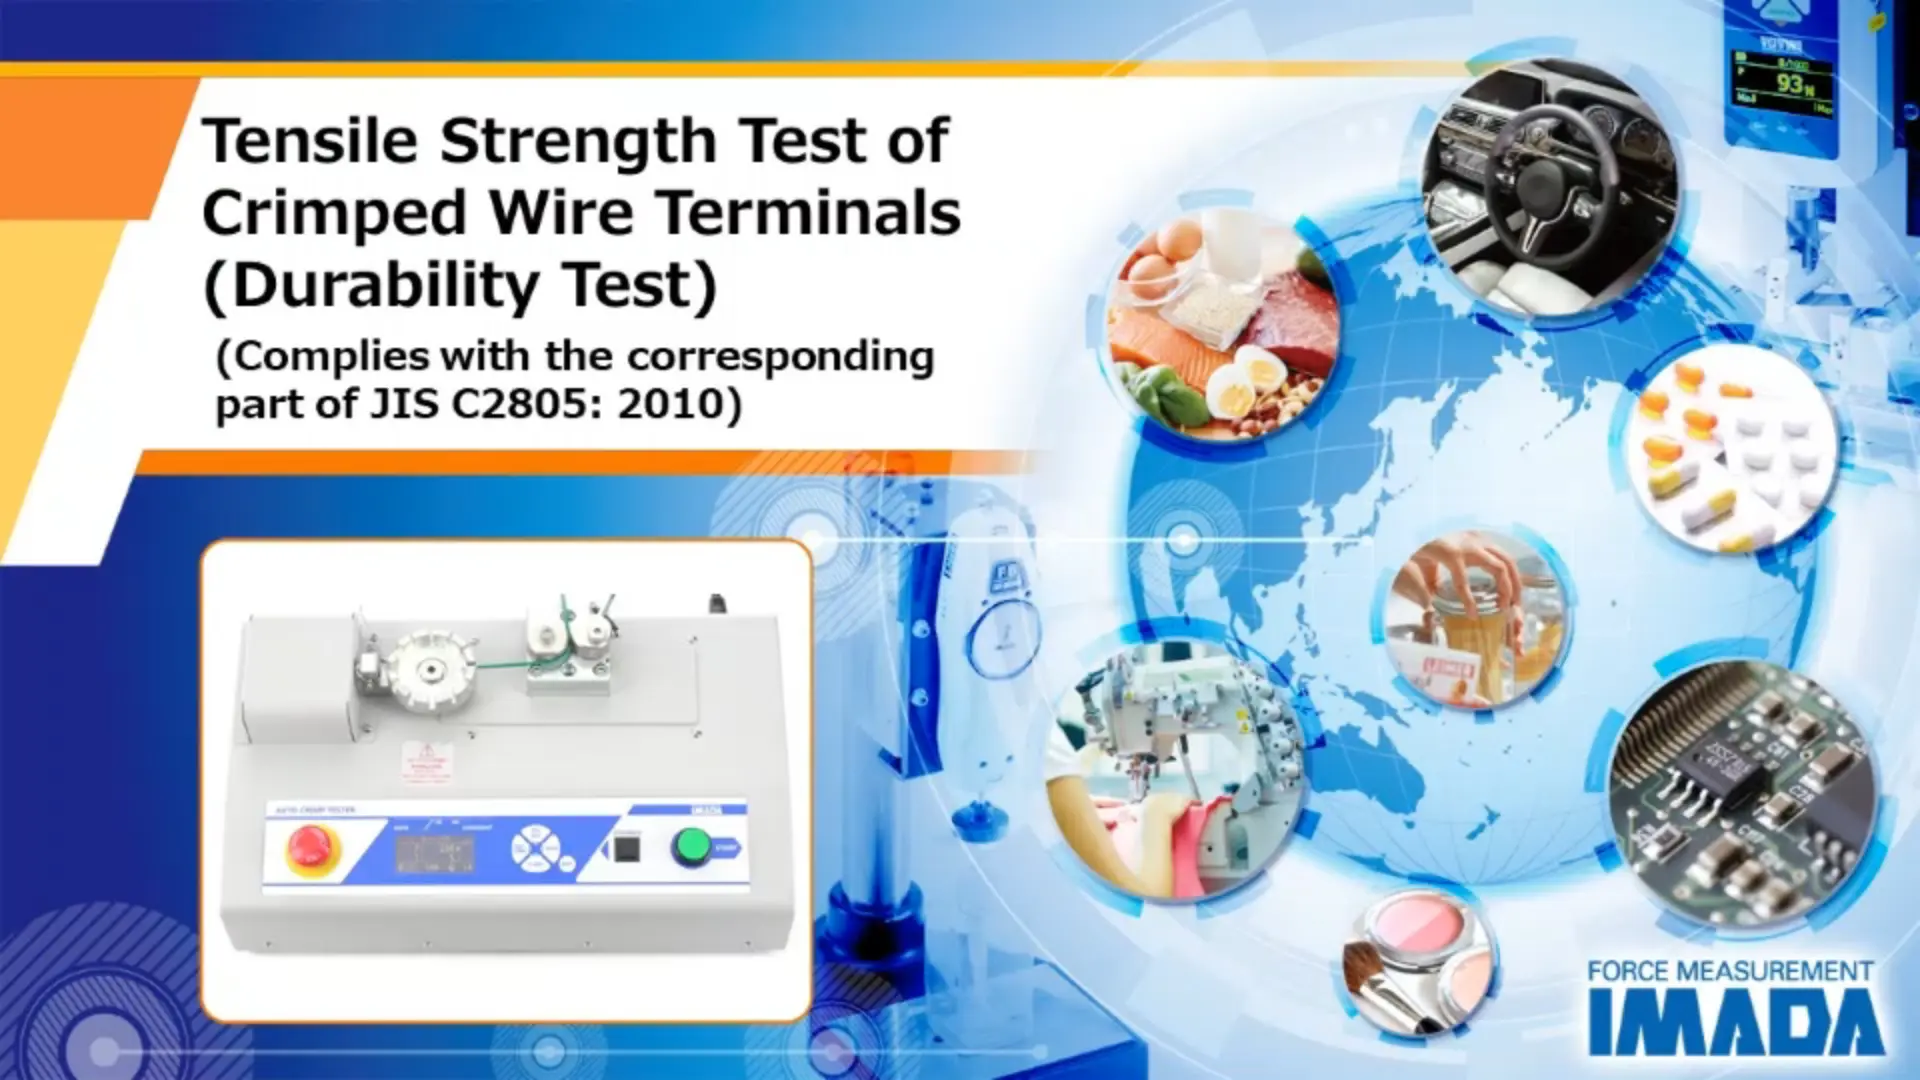 Tensile Strength Test of Crimped Wire Terminals (Durability Test) (Complies with the corresponding part of JIS C2805: 2010)